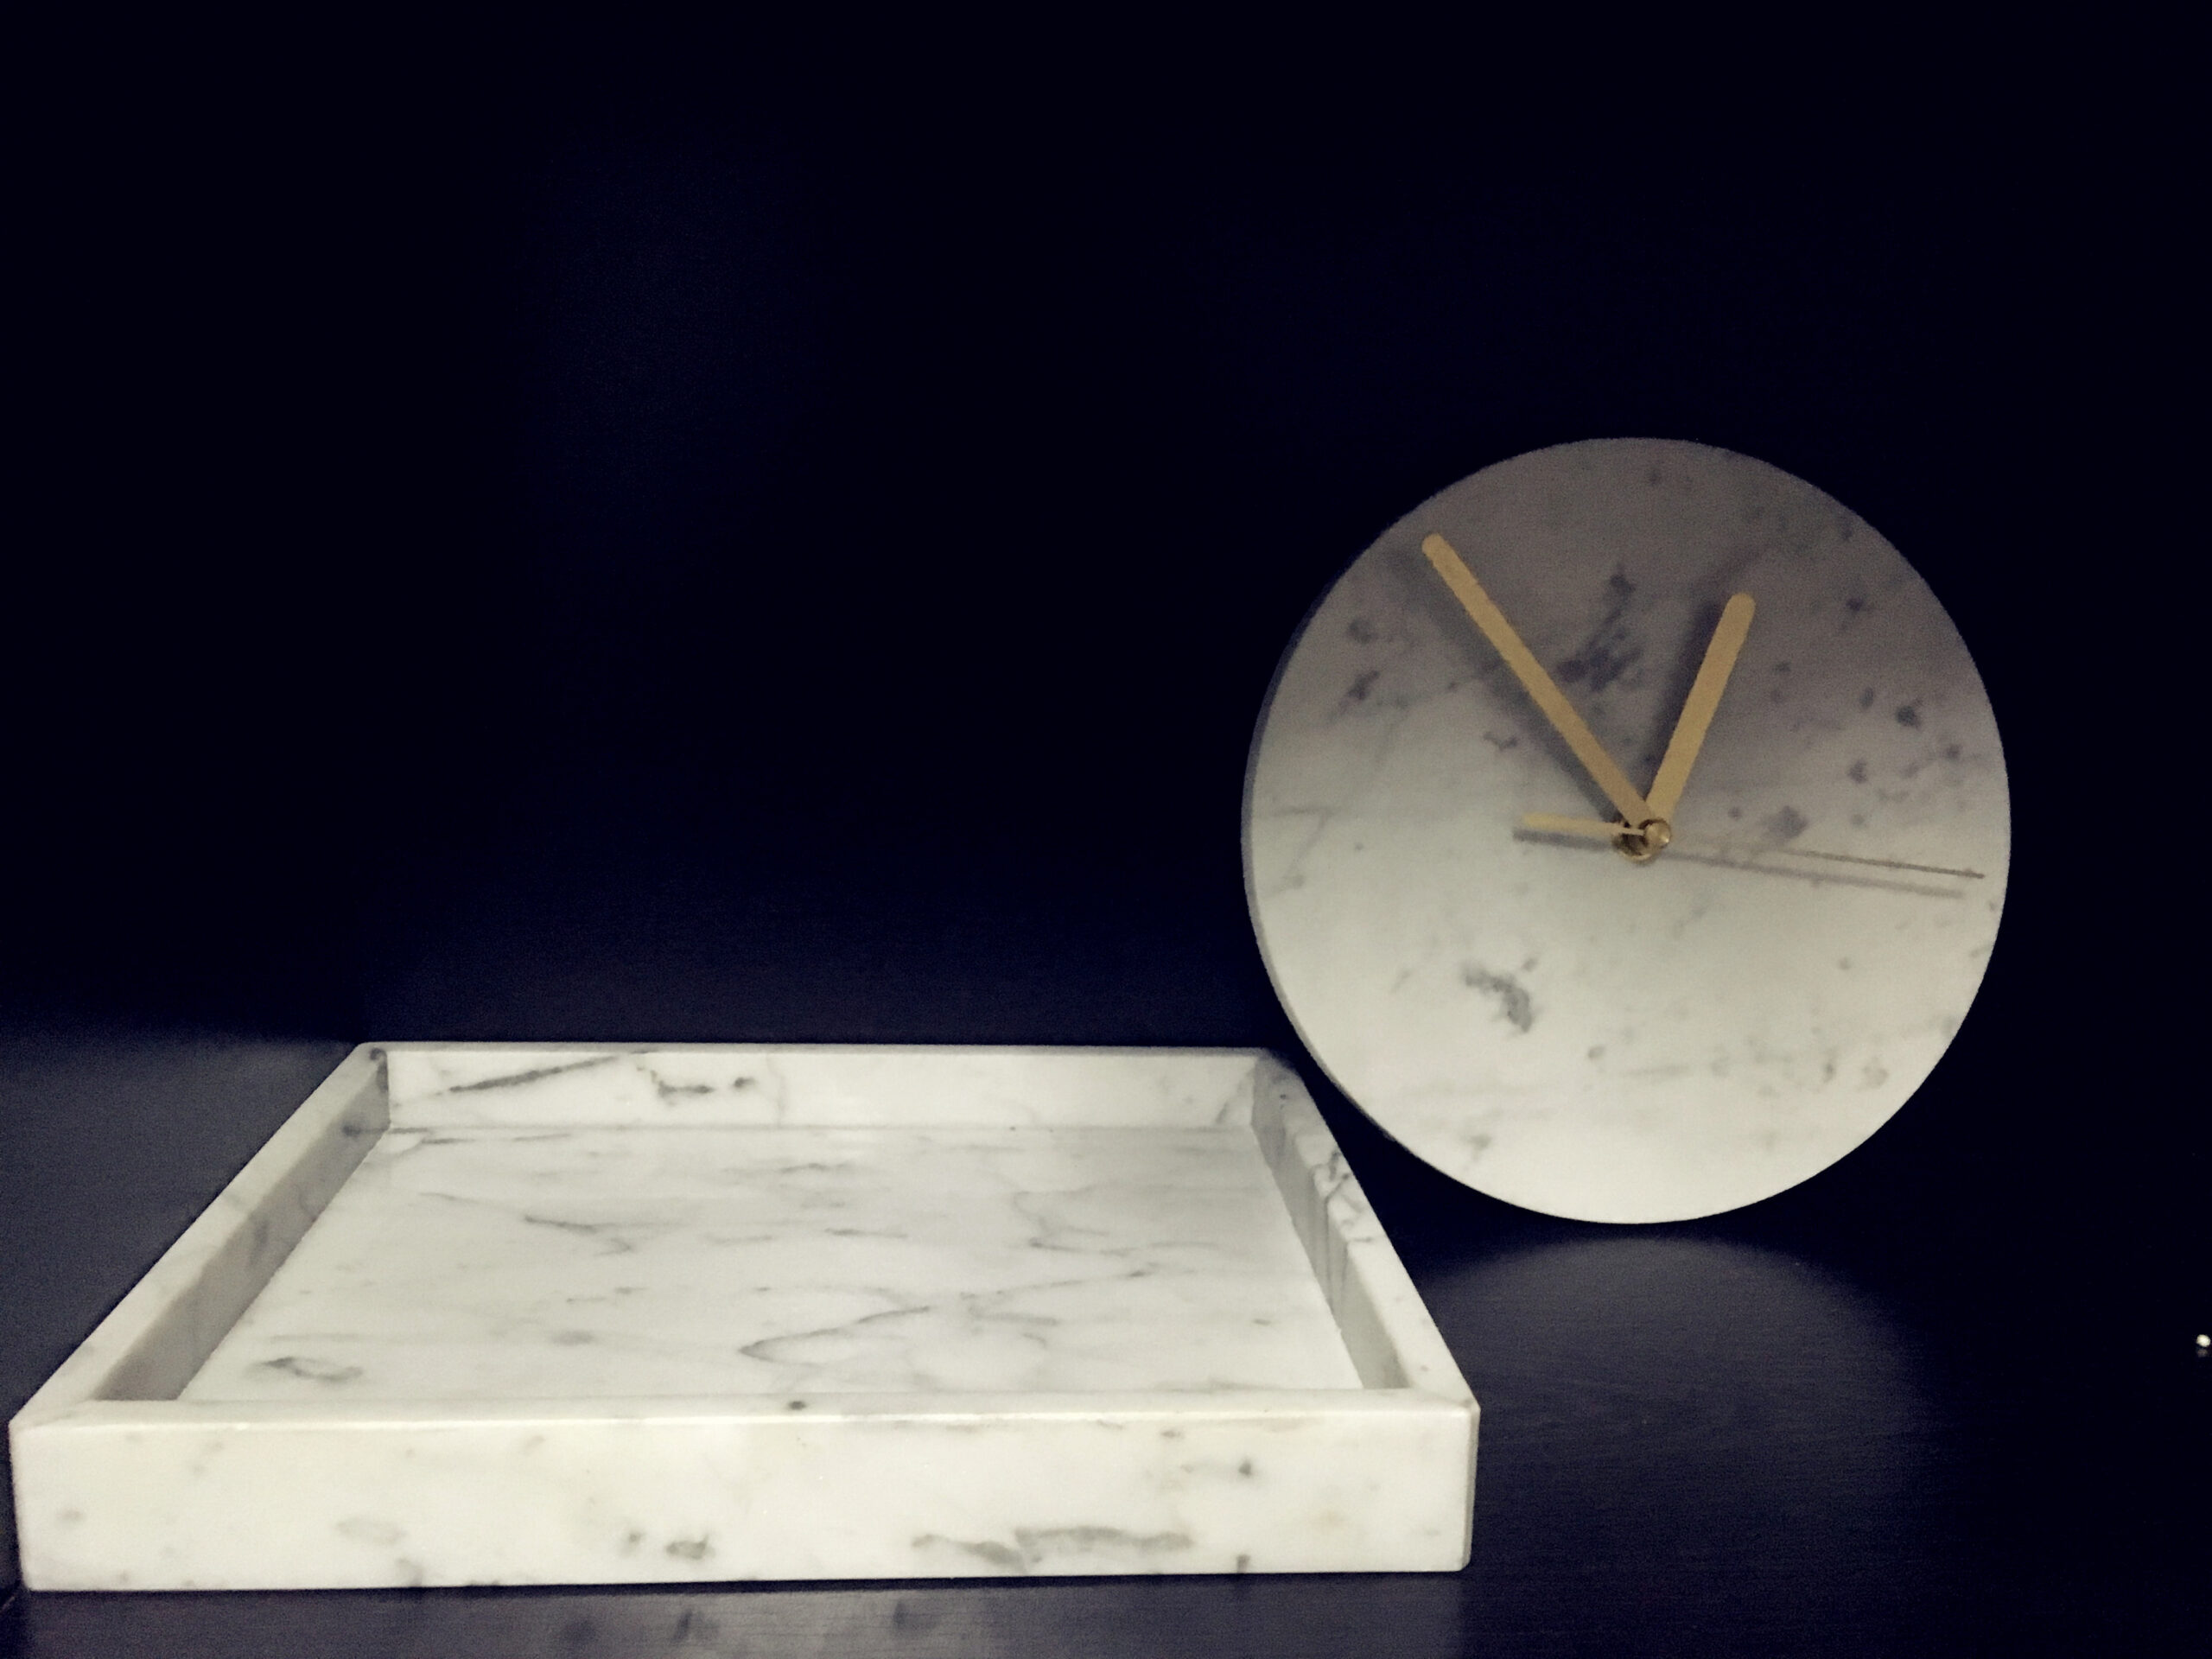 Modern Marble Wall Clock - marble-tiles